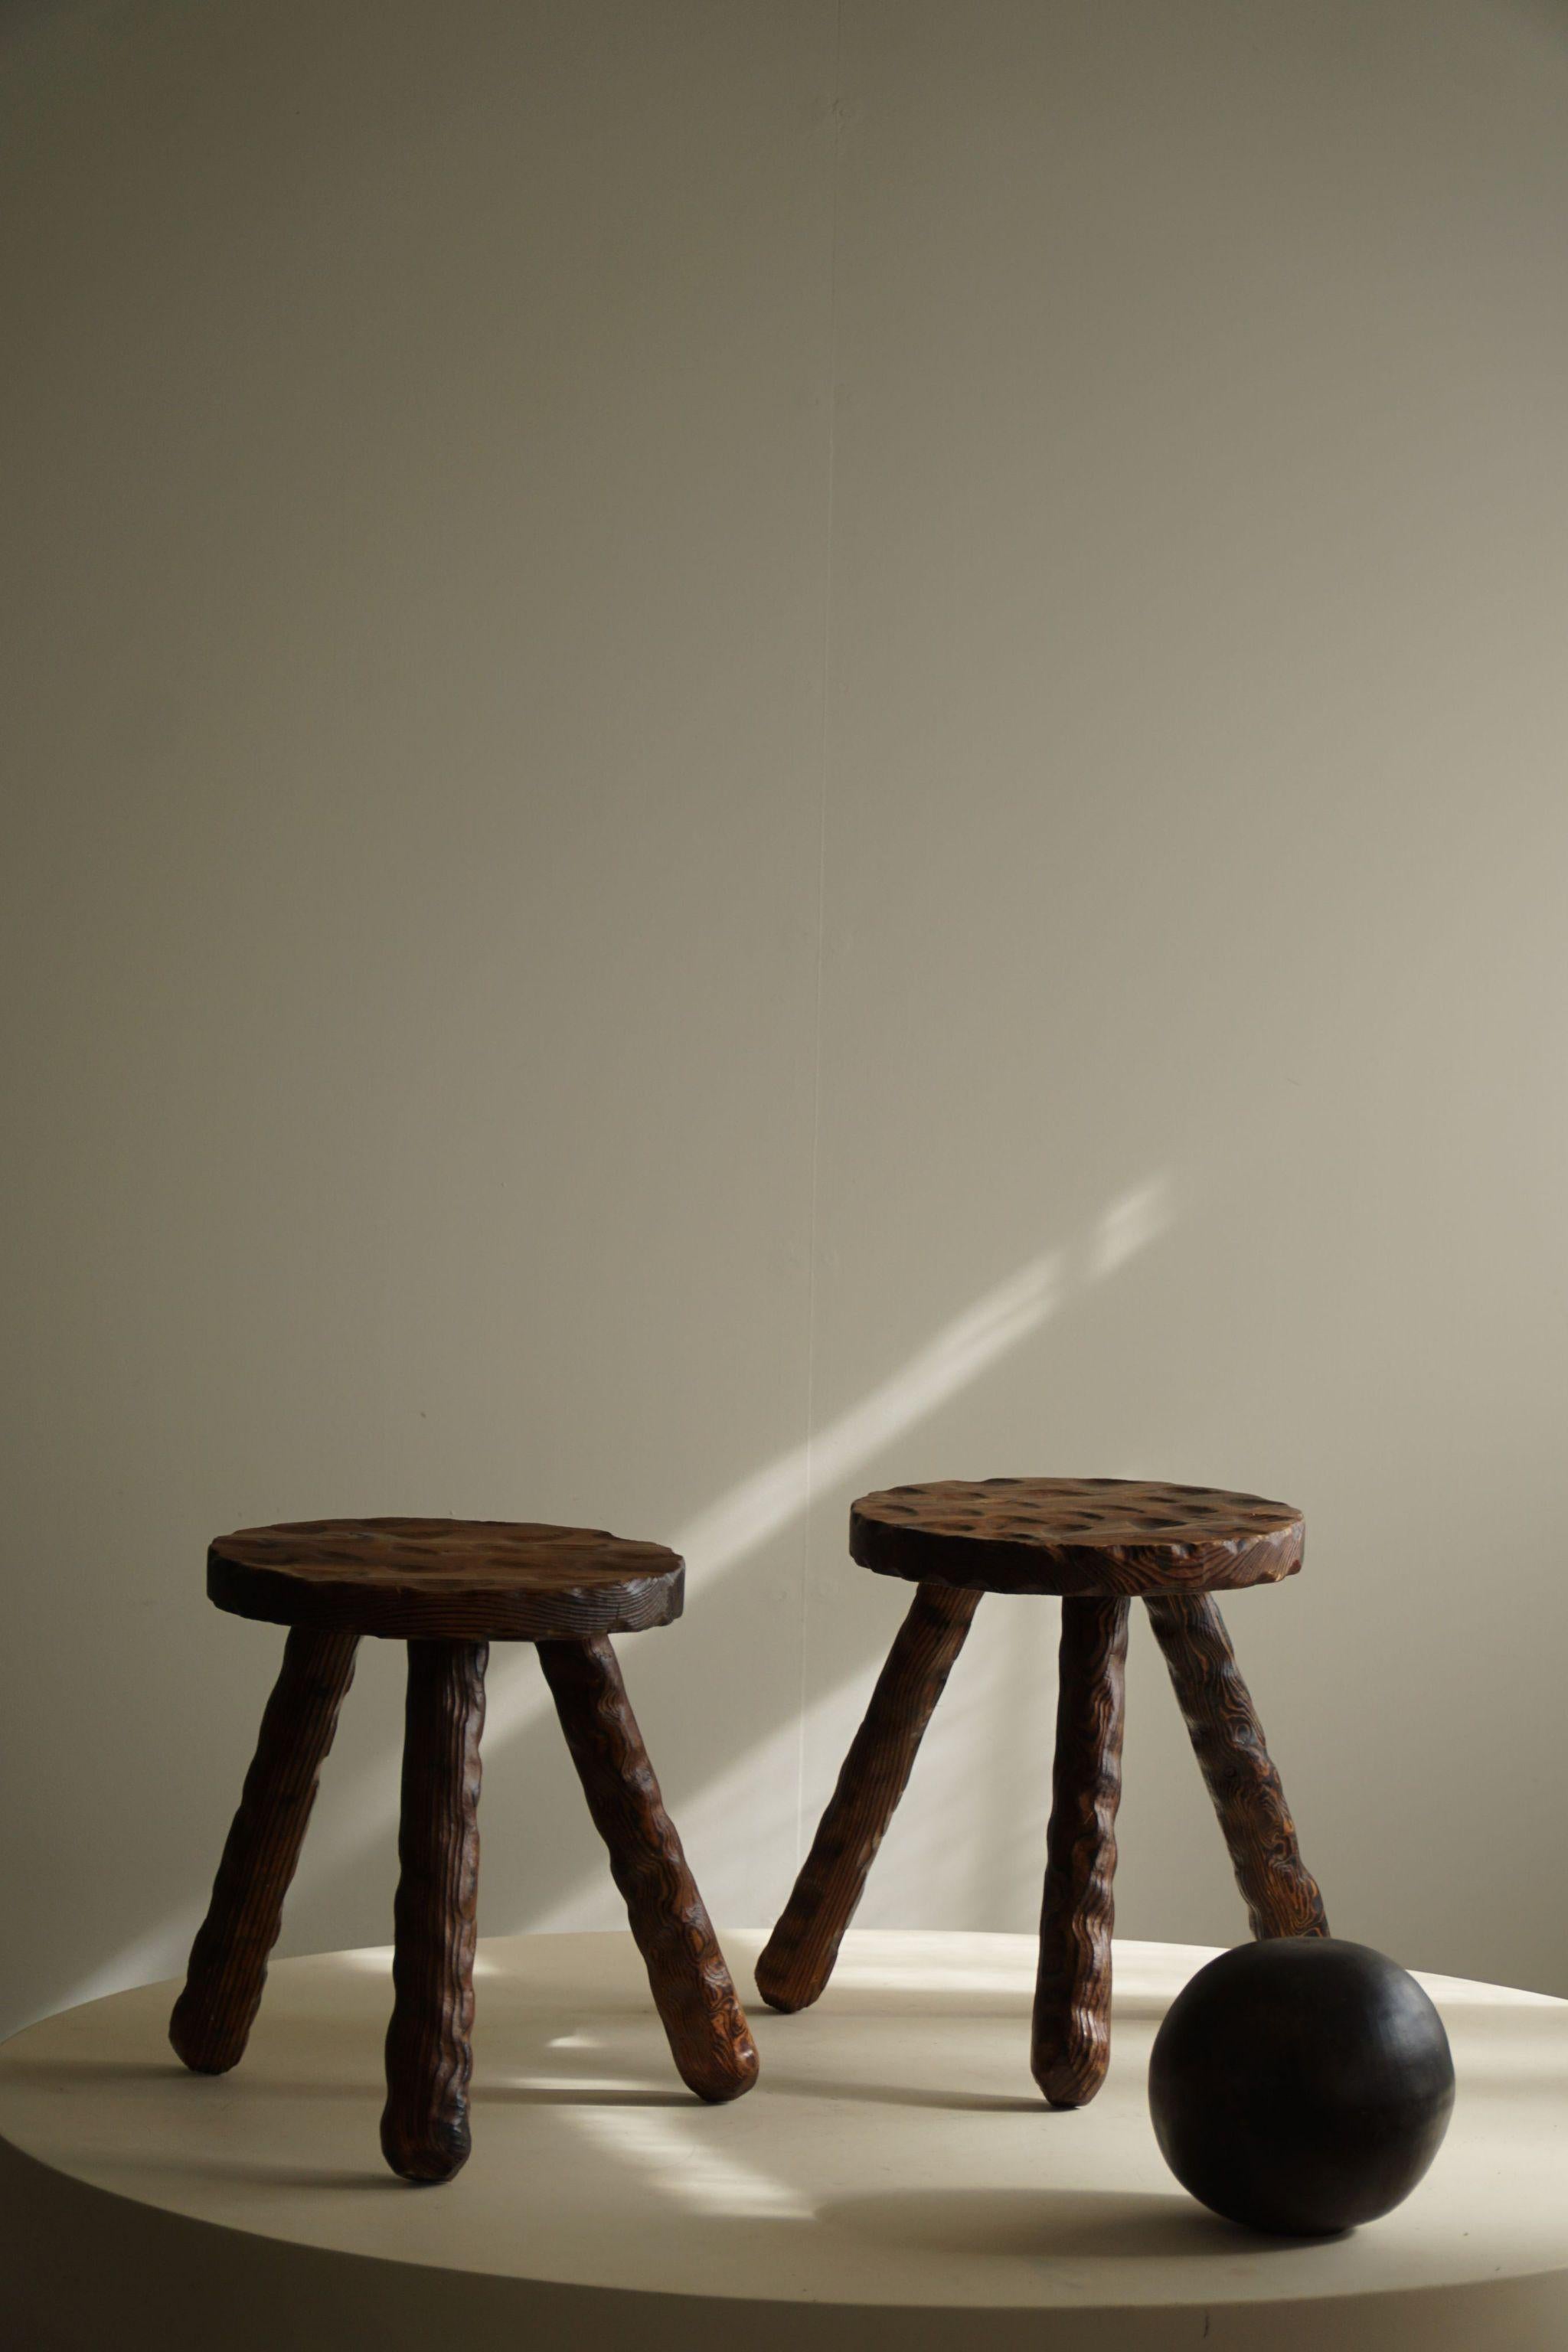 A duo of Wabi Sabi stools, expertly carved from stained pine by a skilled Swedish cabinetmaker during the 1960s. These stools boast a minimalist aesthetic with subtle imperfections that celebrate the beauty of natural materials. Their clean lines